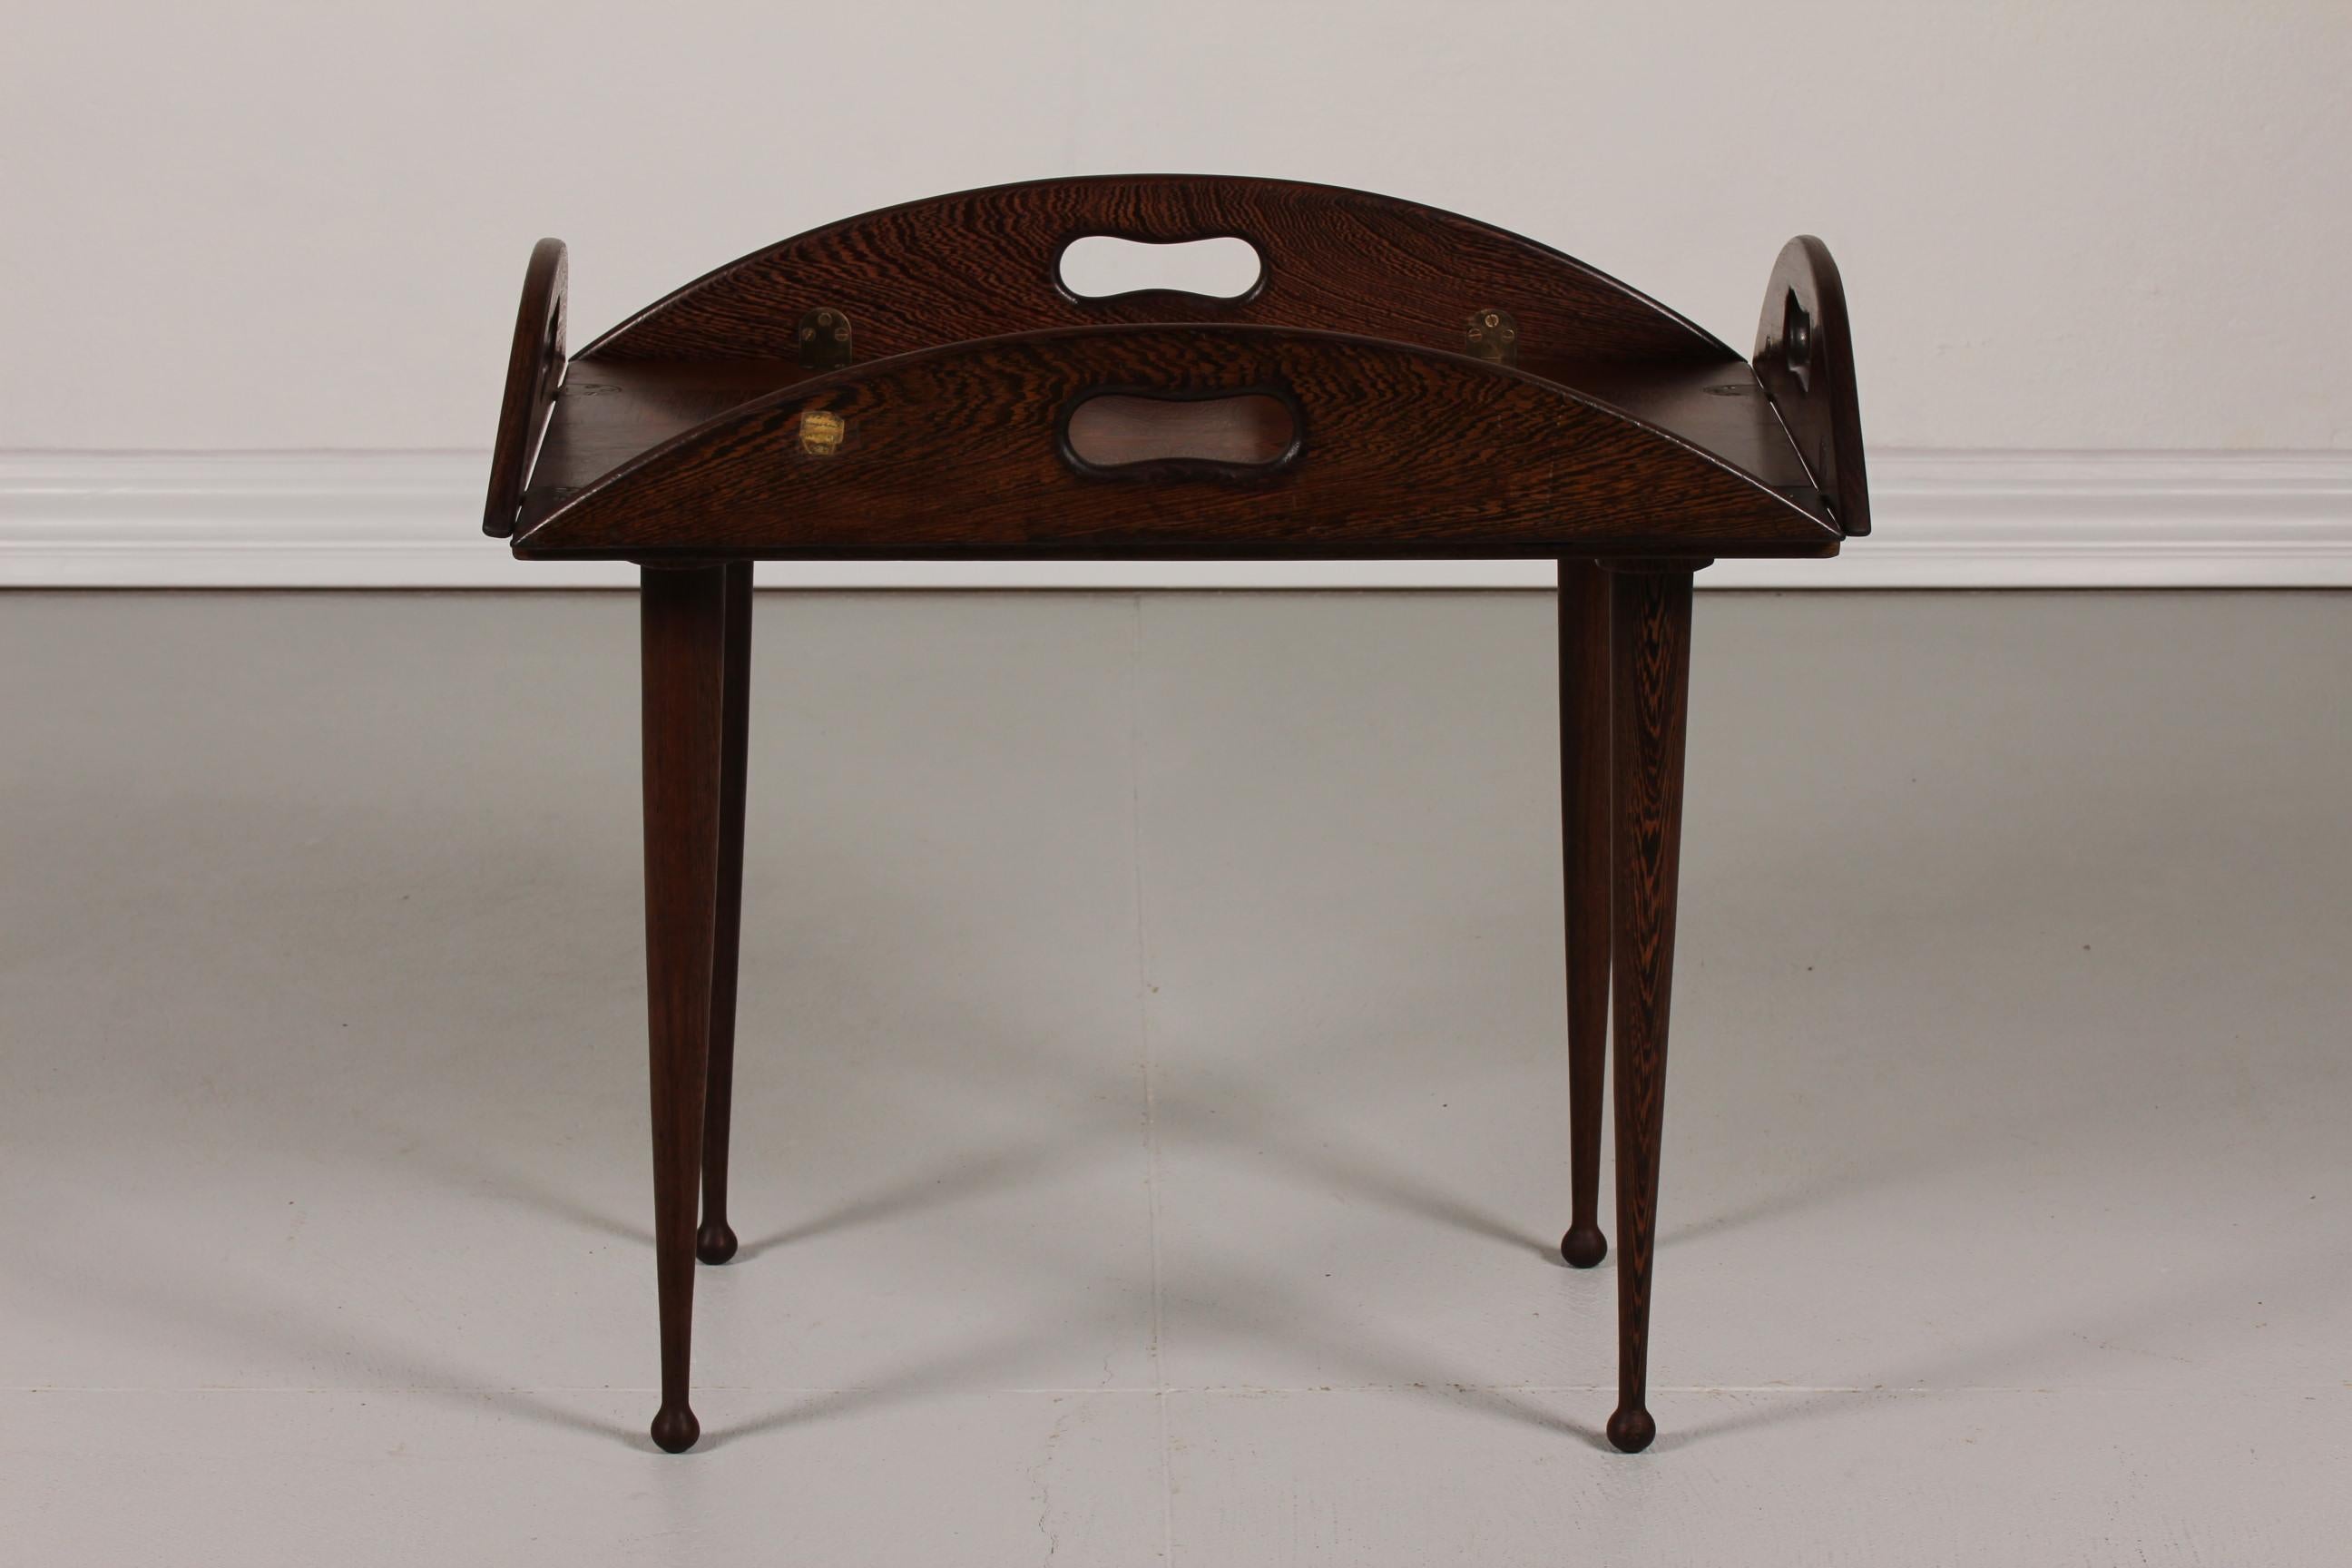 Butlers tray attributed to the danish designer Jeanne Grut.
It is made of wengé with 4 drumstick legs.
The table has underneath a handwritten label with among other Jeanne Gruts name 
- see photo

Measures: Length 72/92 cm
Width 49/68